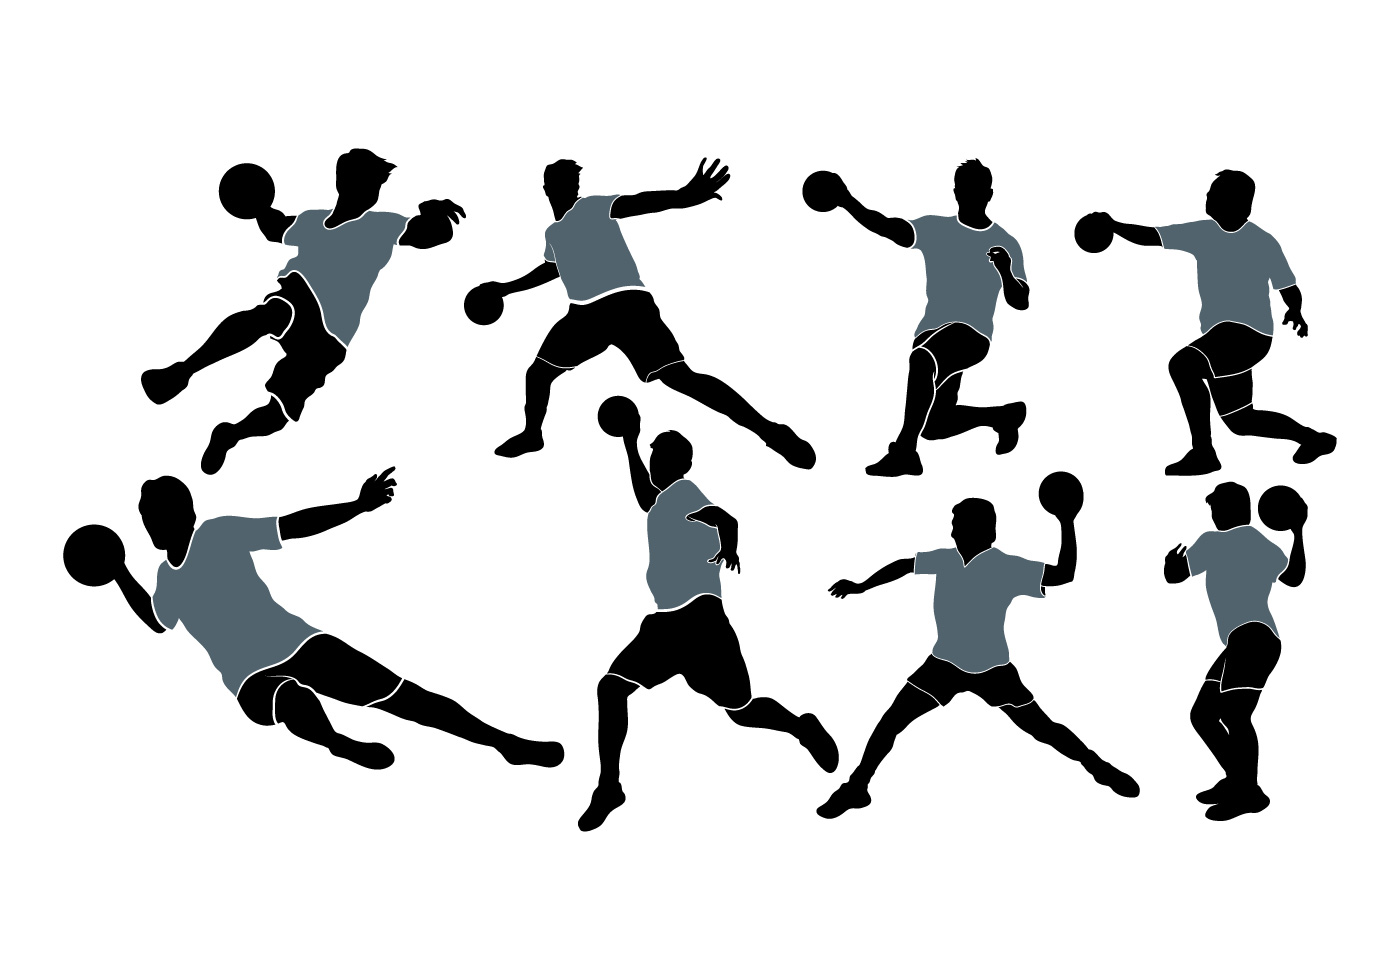 Silhouette clip art library. Dodgeball clipart dodgeball player